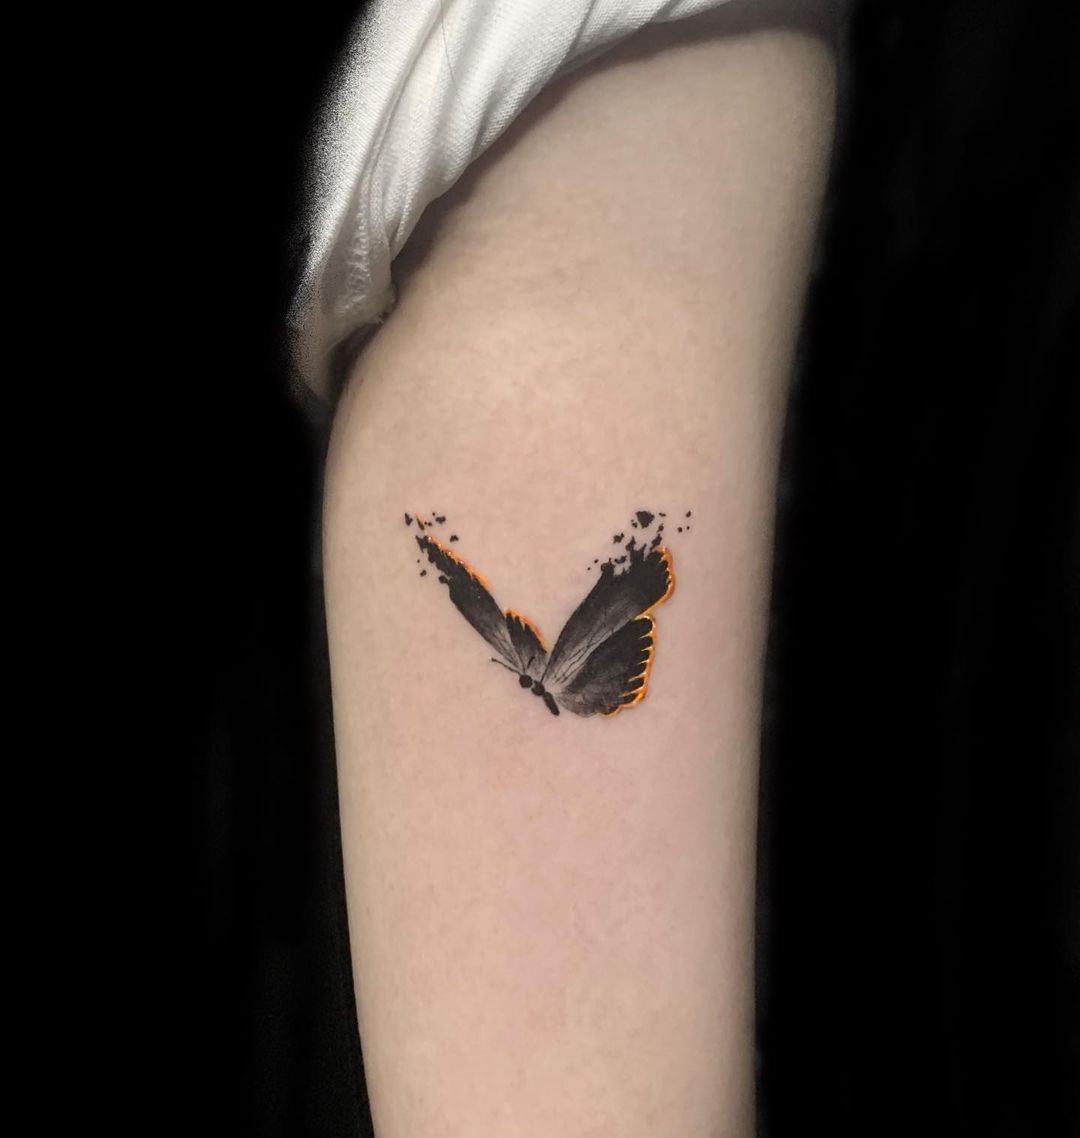 25 Small Butterfly Tattoos That Will Make Your Heart Flutter